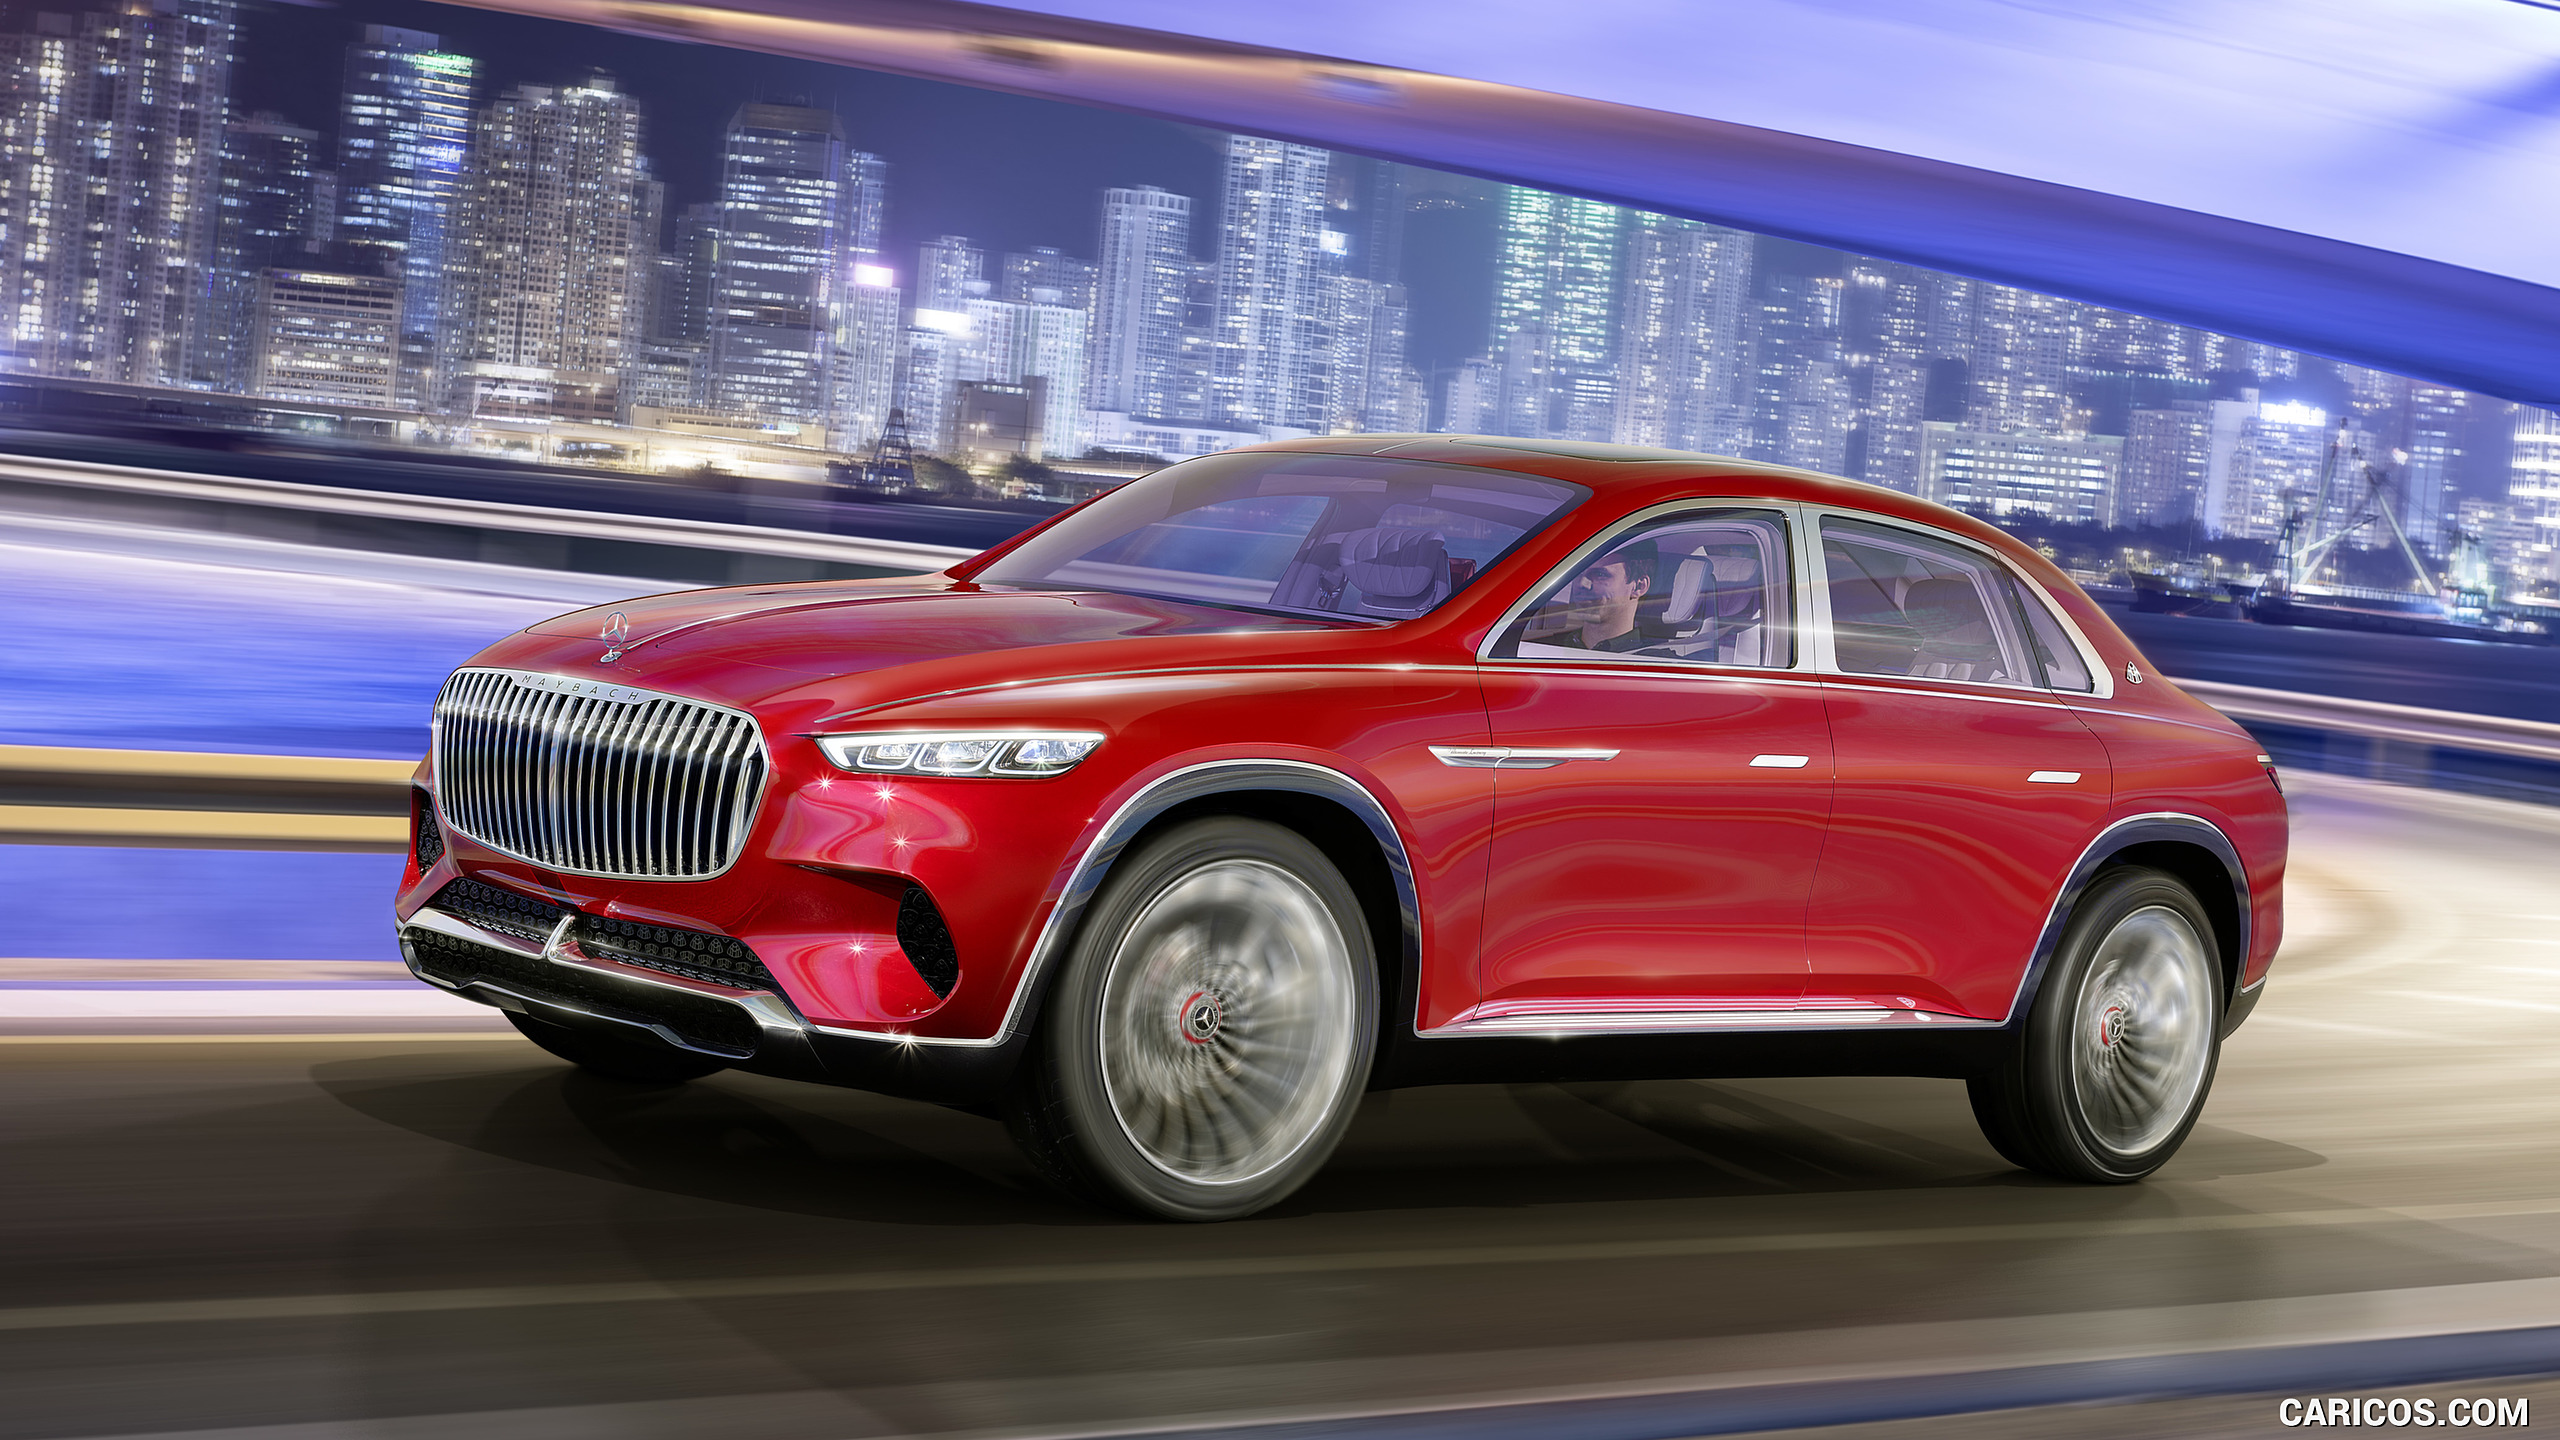 2018 Mercedes-Maybach Vision Ultimate Luxury SUV Concept - Front Three-Quarter, #1 of 41